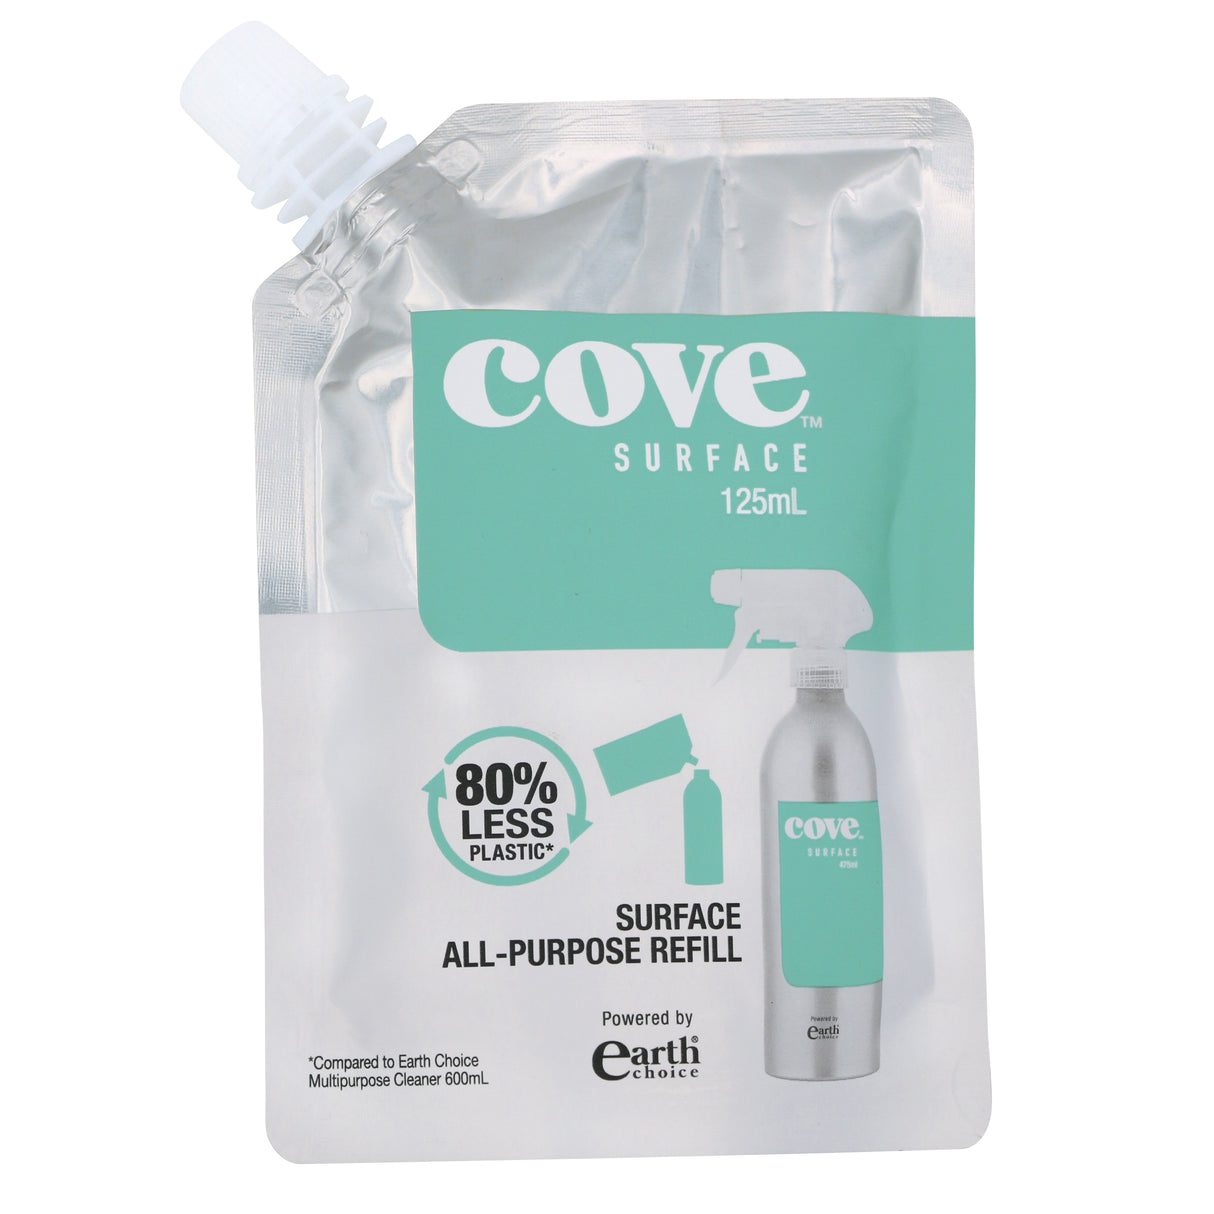 Cove Surface Cleaner Refill 125ml